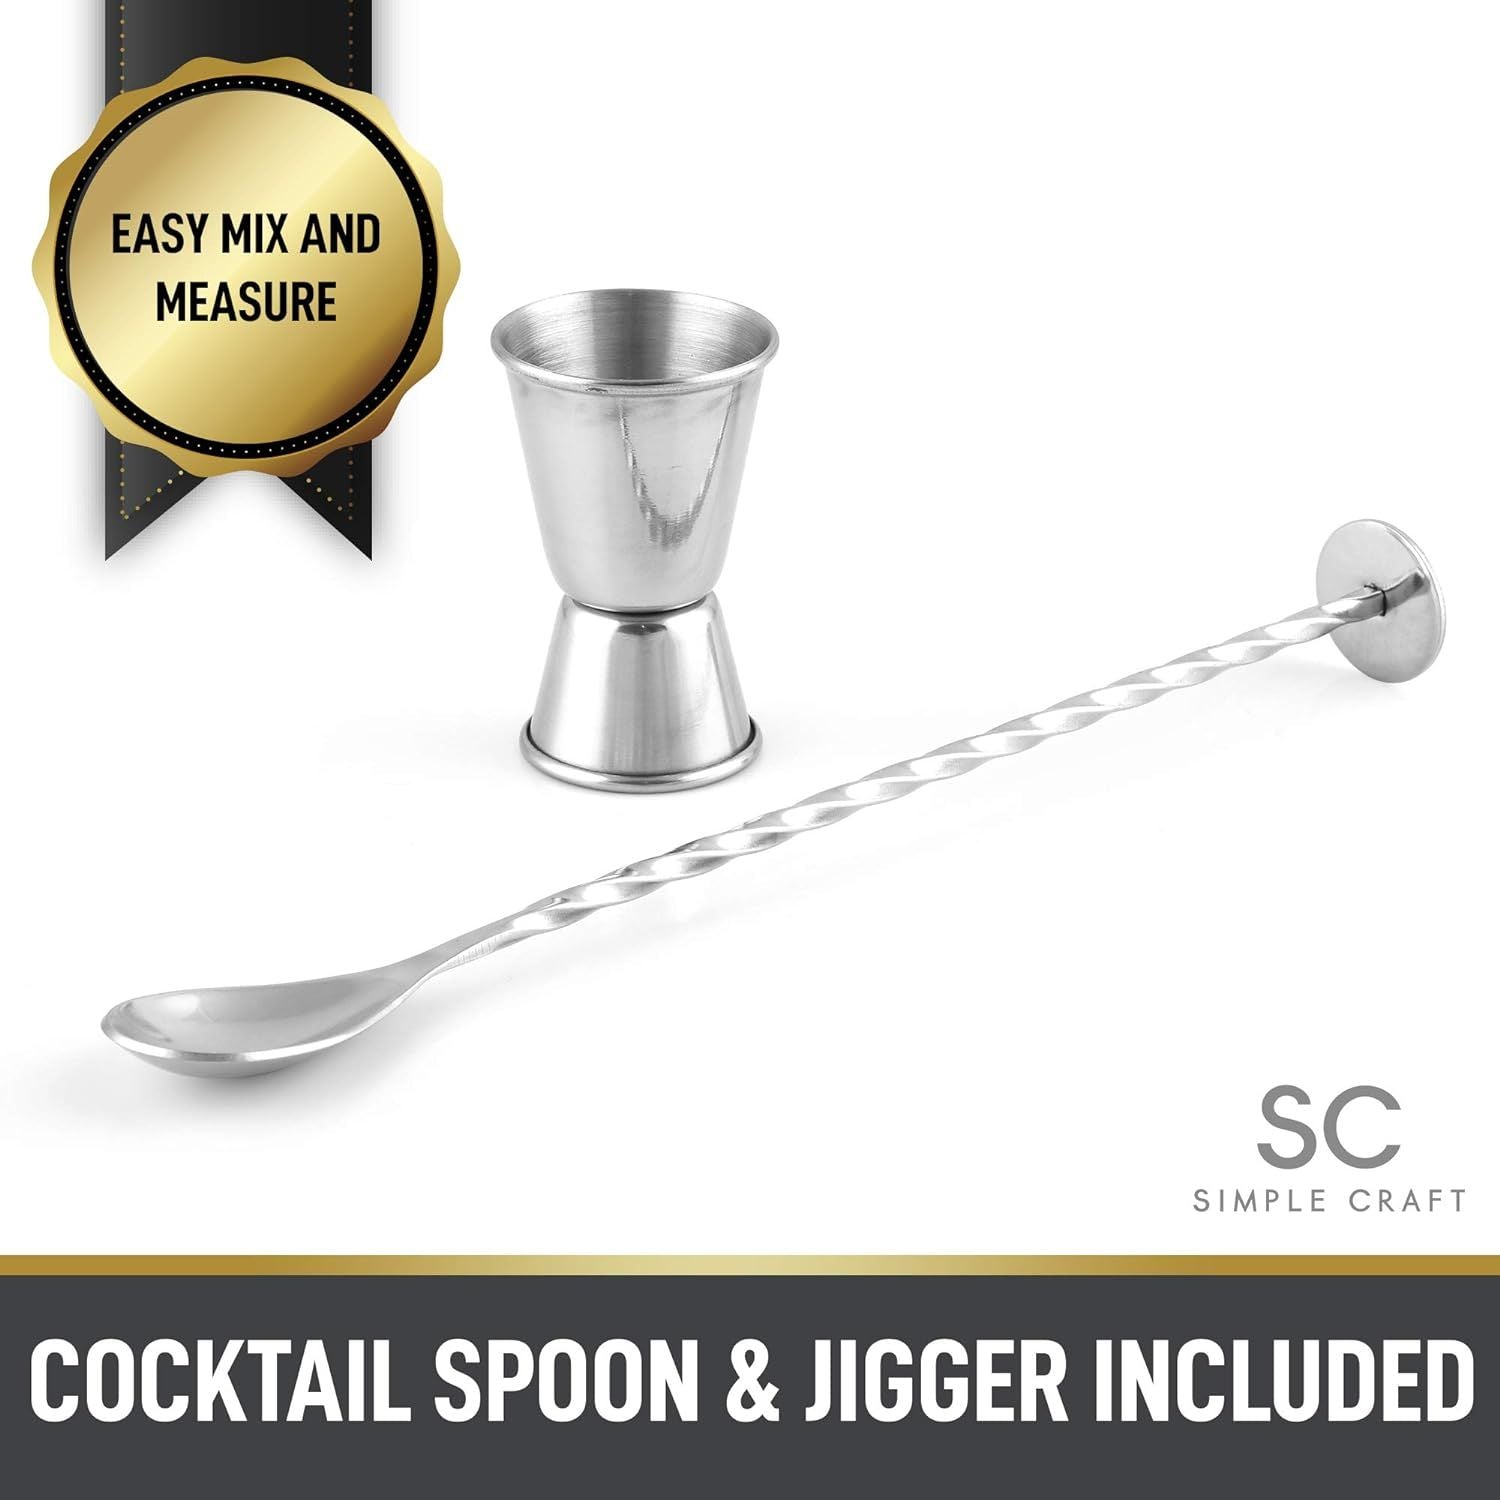 Zulay Kitchen Cocktail Shaker Stainless Steel Drink Mixer with